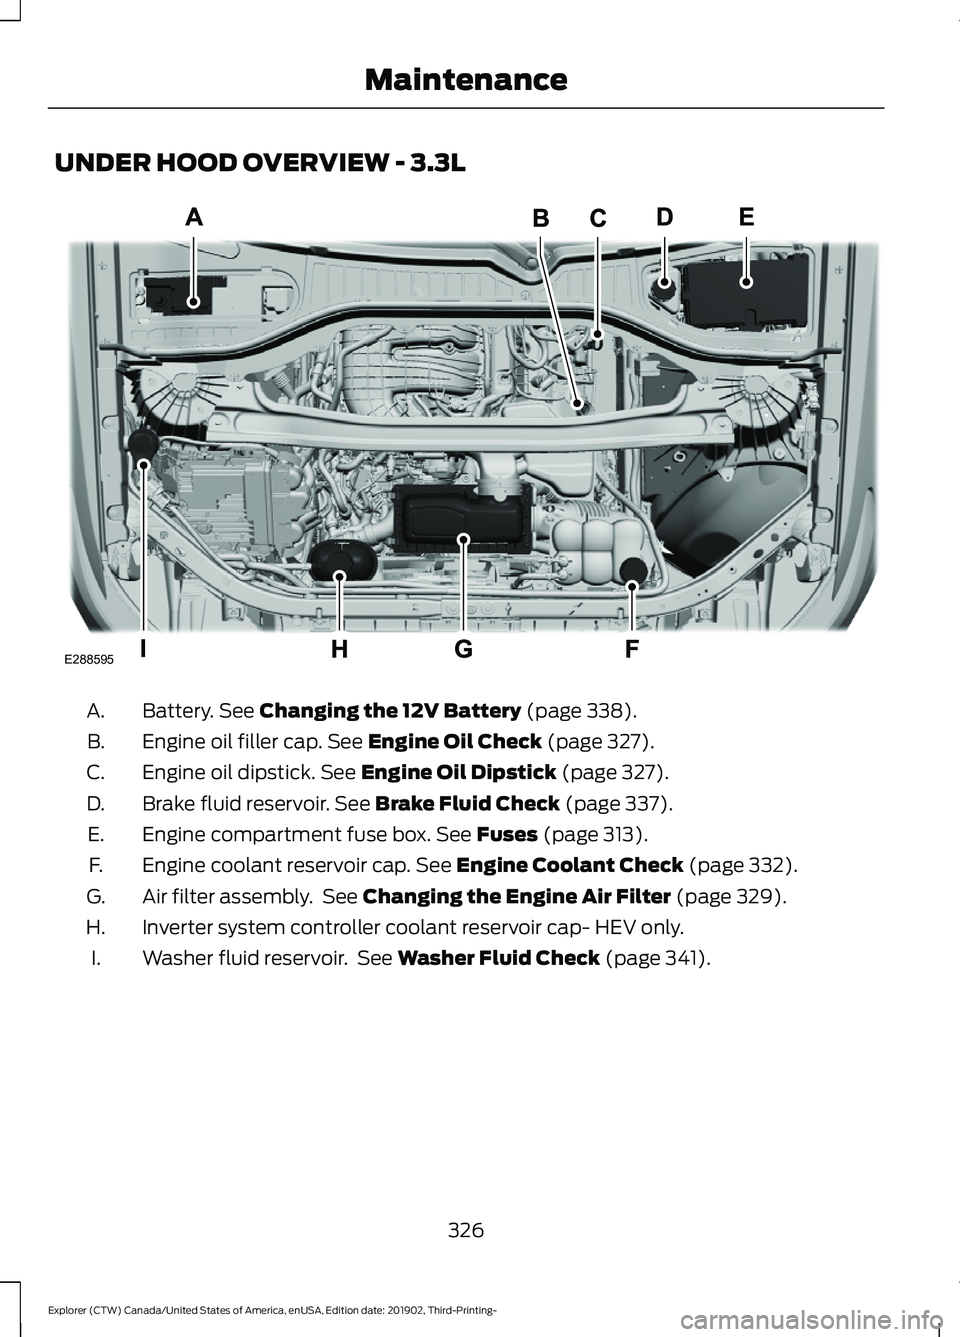 FORD EXPLORER 2020  Owners Manual UNDER HOOD OVERVIEW - 3.3L
Battery. See Changing the 12V Battery (page 338).
A.
Engine oil filler cap.
 See Engine Oil Check (page 327).
B.
Engine oil dipstick.
 See Engine Oil Dipstick (page 327).
C.